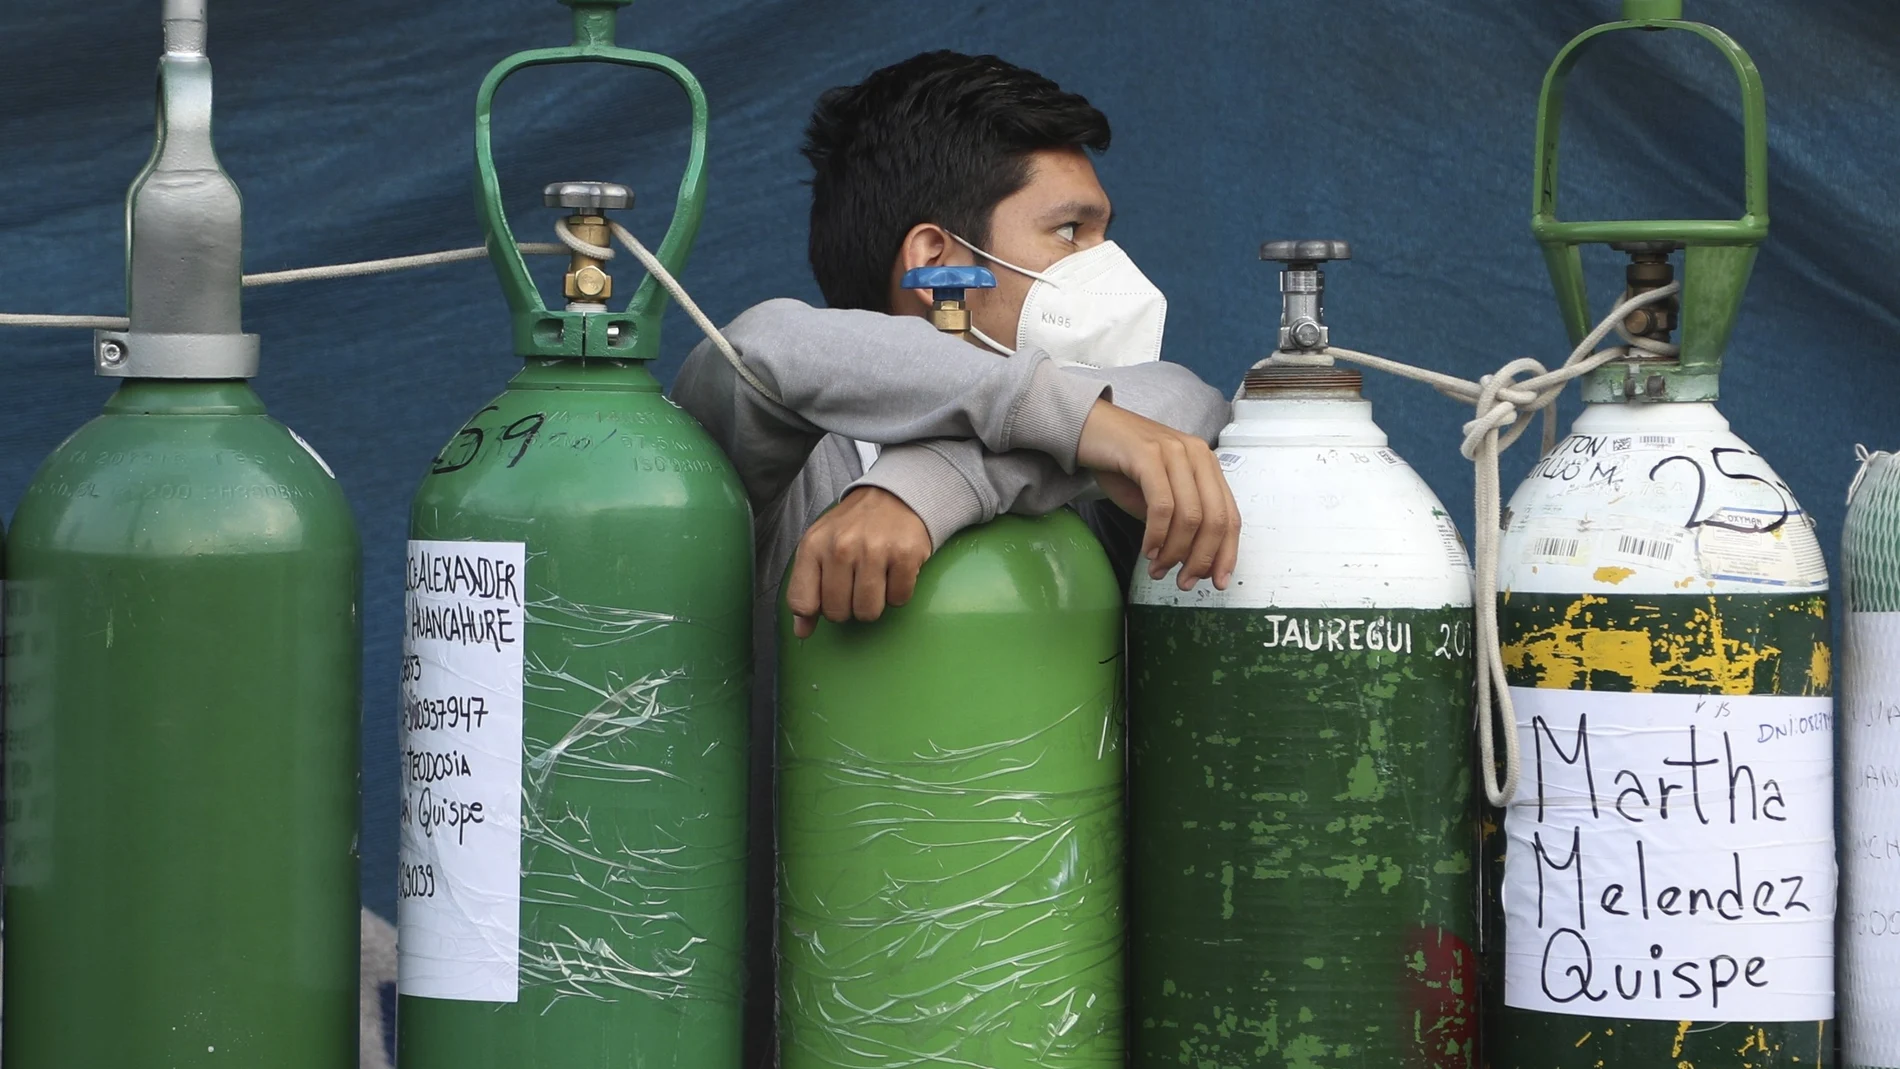 A man leans on his empty oxygen cylinder waiting for a refill shop to open in the San Juan de Lurigancho neighborhood of Lima, Peru, Monday, Feb. 22, 2021, as the lack of medical oxygen to treat COVID-19 patients continues to be the norm nationwide. Long lines form outside private providers with many spending the night outside so as to not lose their place in line. (AP Photo/Martin Mejia)